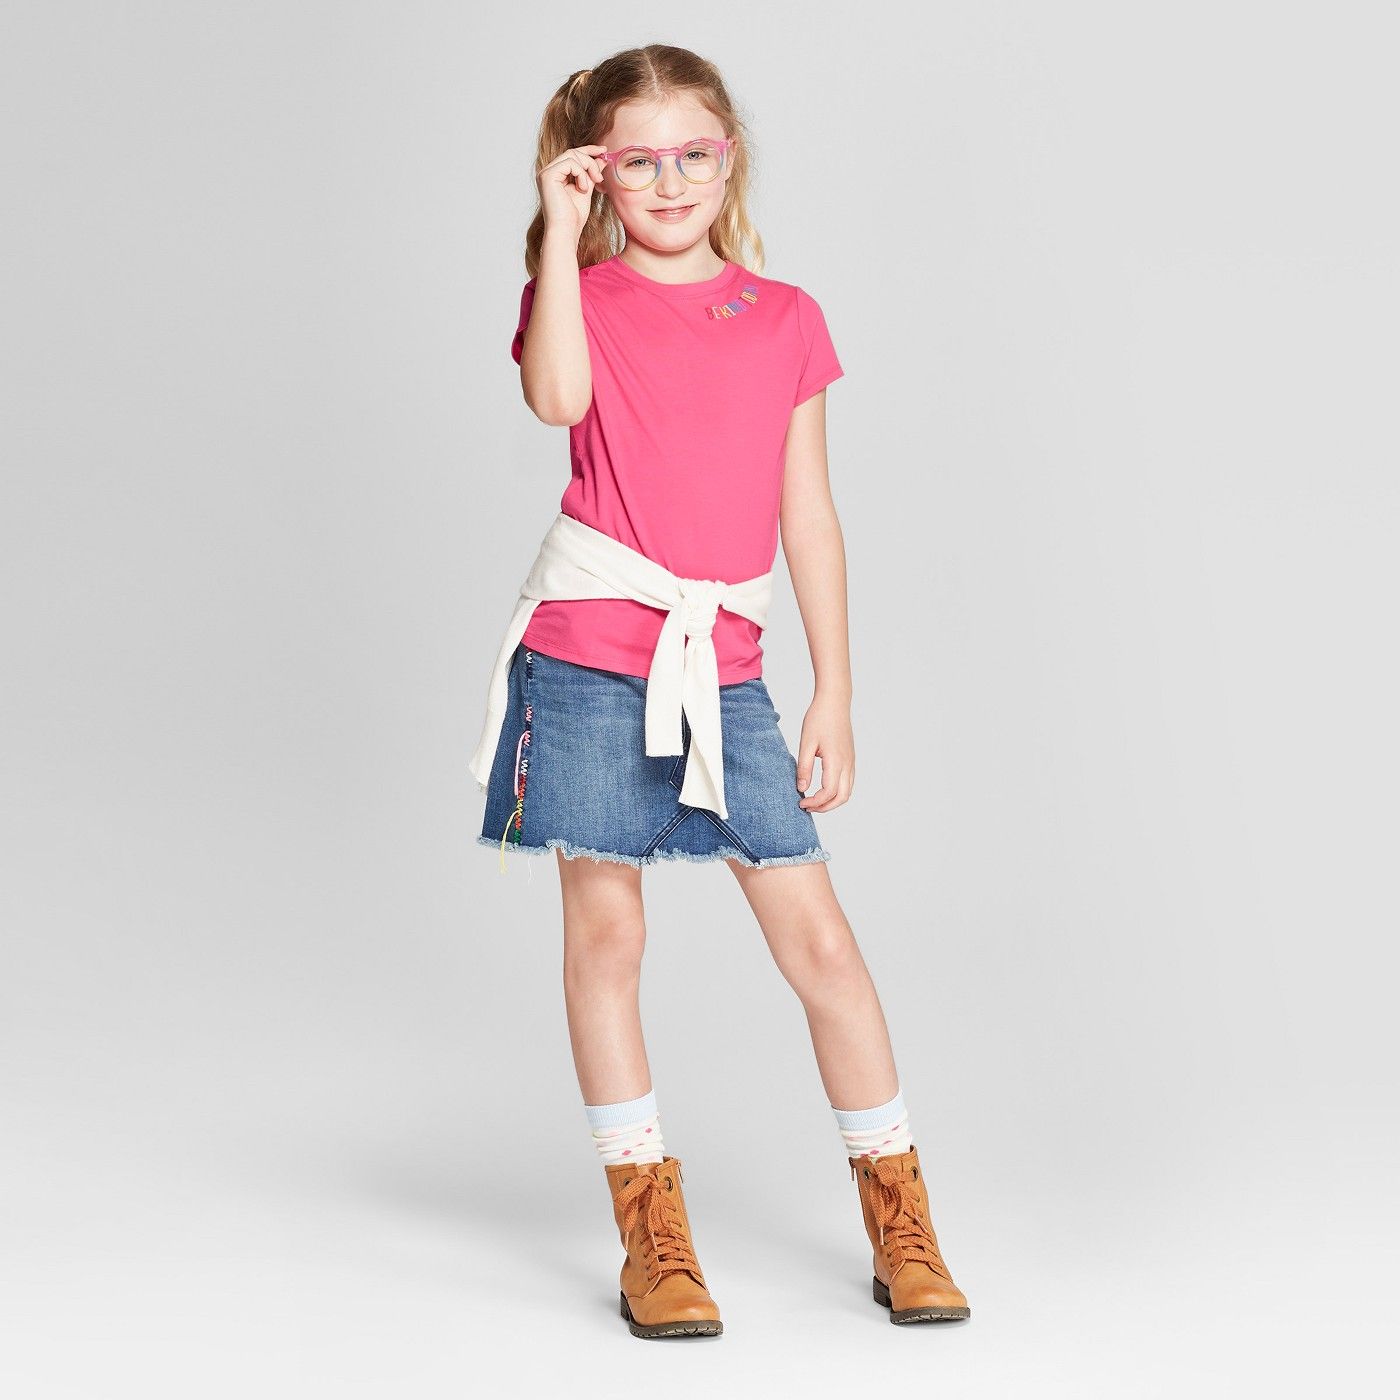 cute girl outfits kids